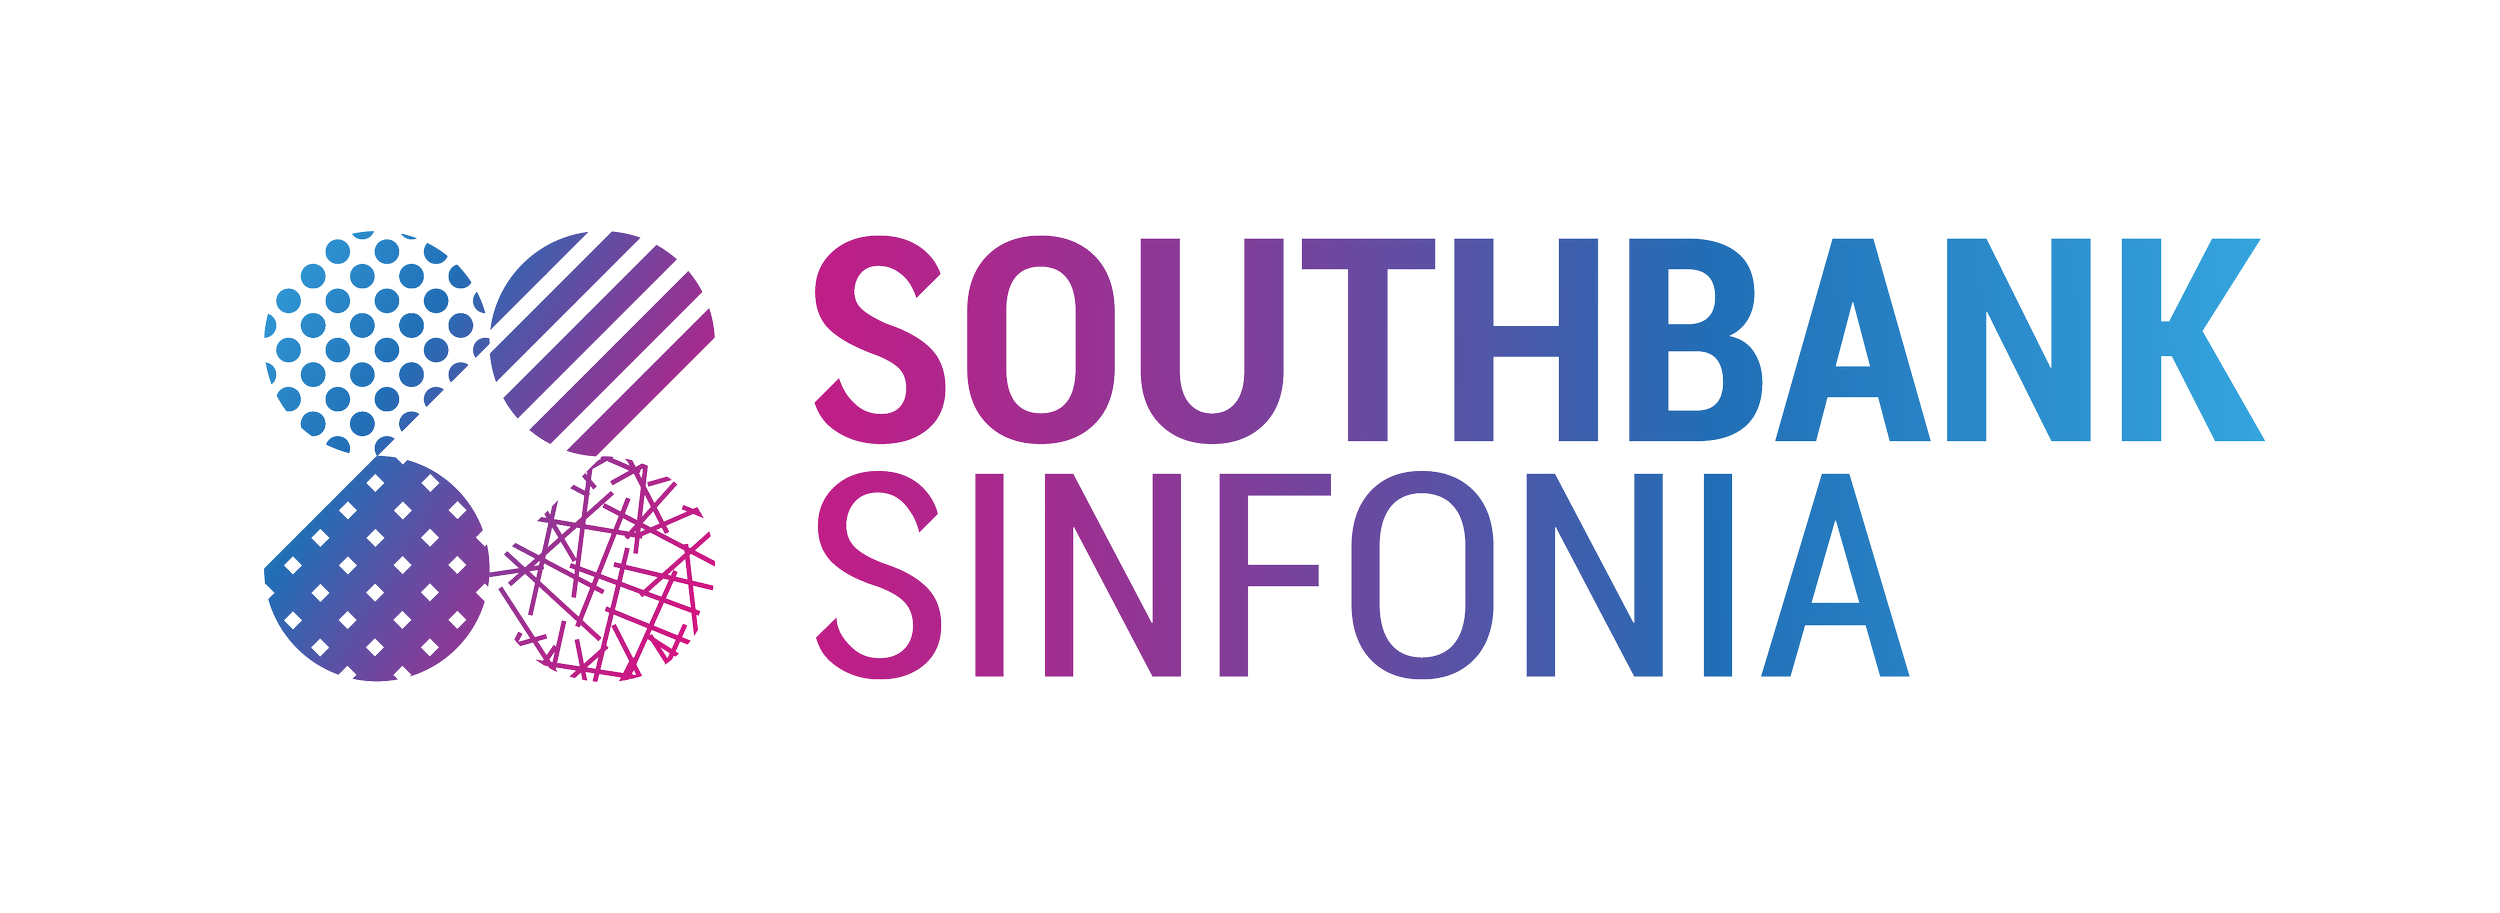 Southbank Sinfonia Colour - PNG.png